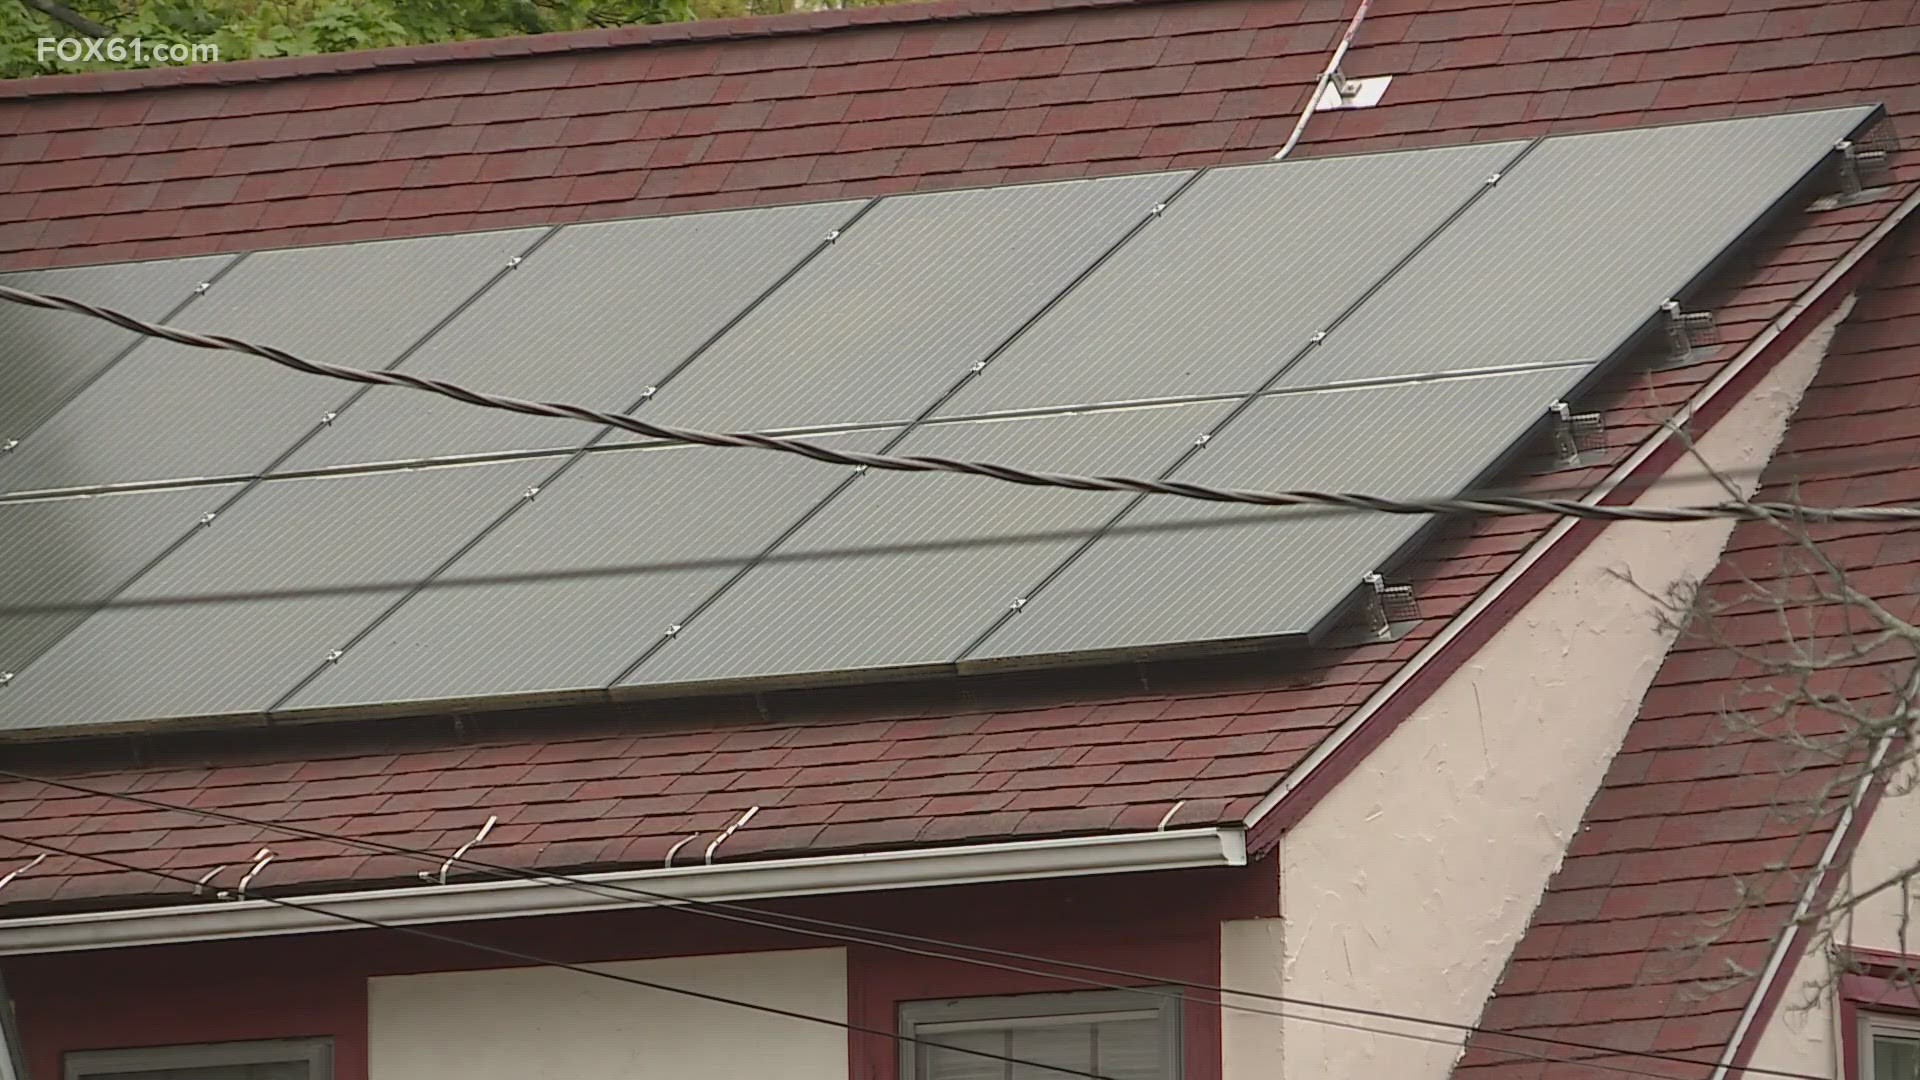 "Solar for All New Haven" aims to close the energy affordability gap in the Elm City.